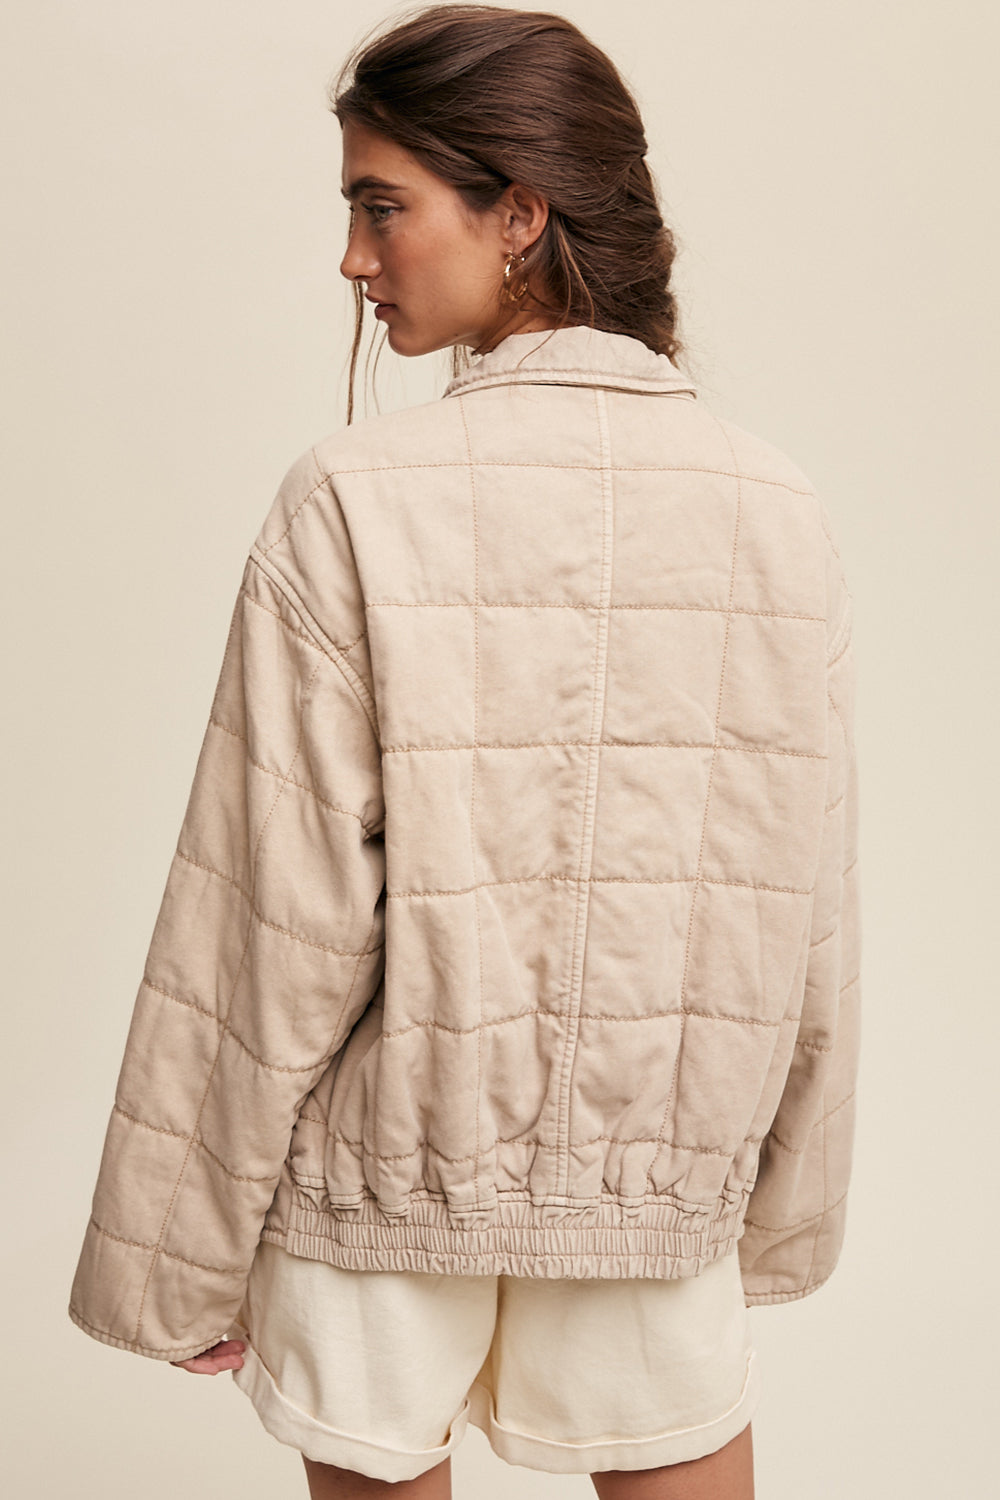 Quilted Denim Jacket - Cream-jacket- Hometown Style HTS, women's in store and online boutique located in Ingersoll, Ontario